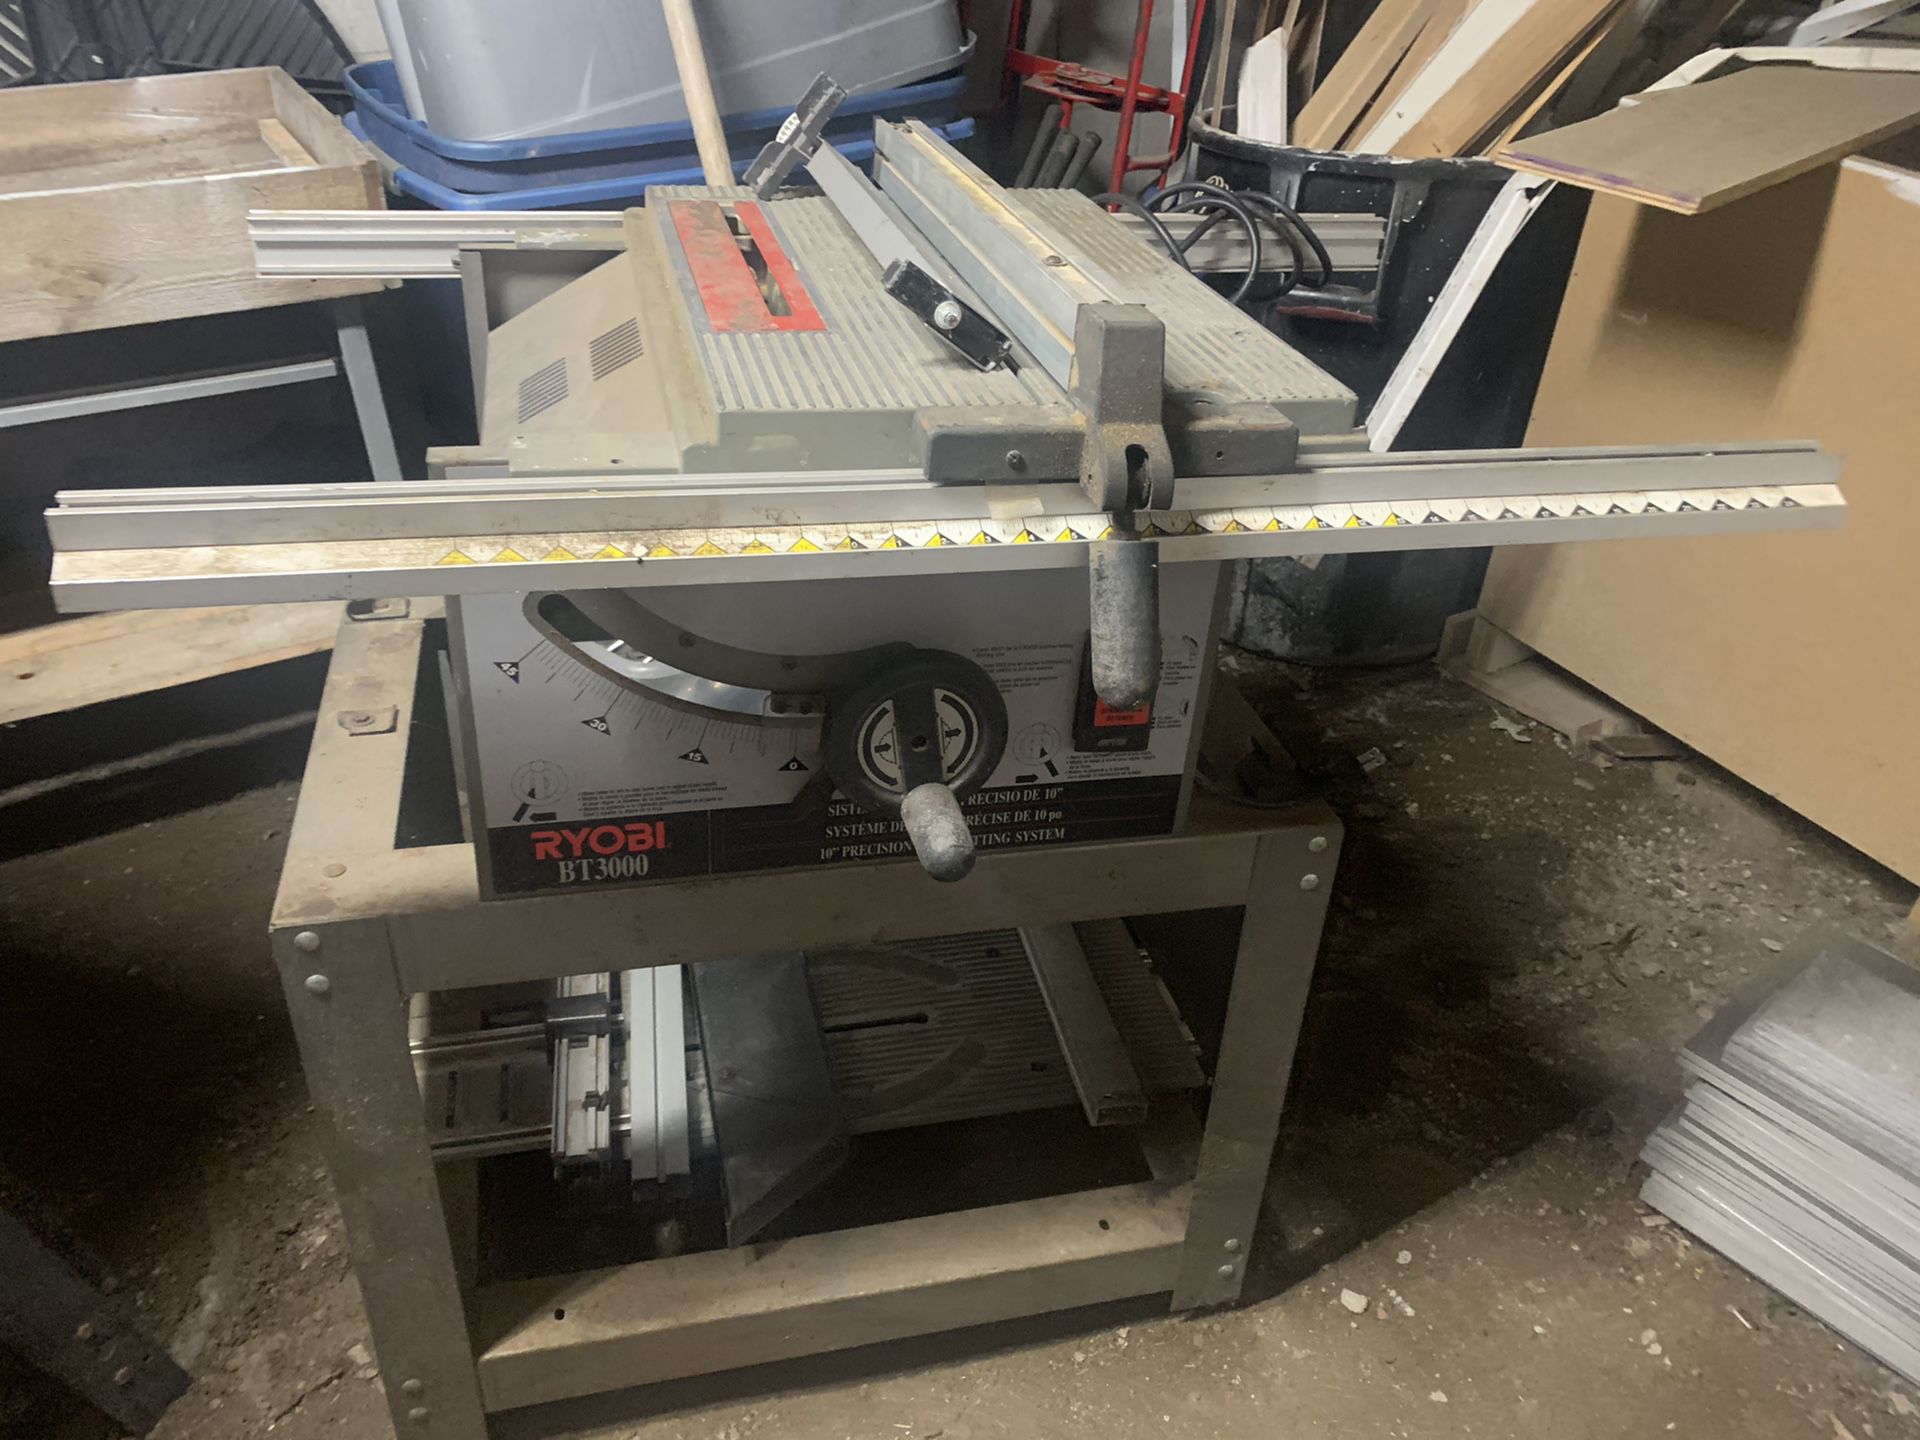 Ryobi table saw and Craftsman Radial arm saw with drill press $150 each or $250 for both.